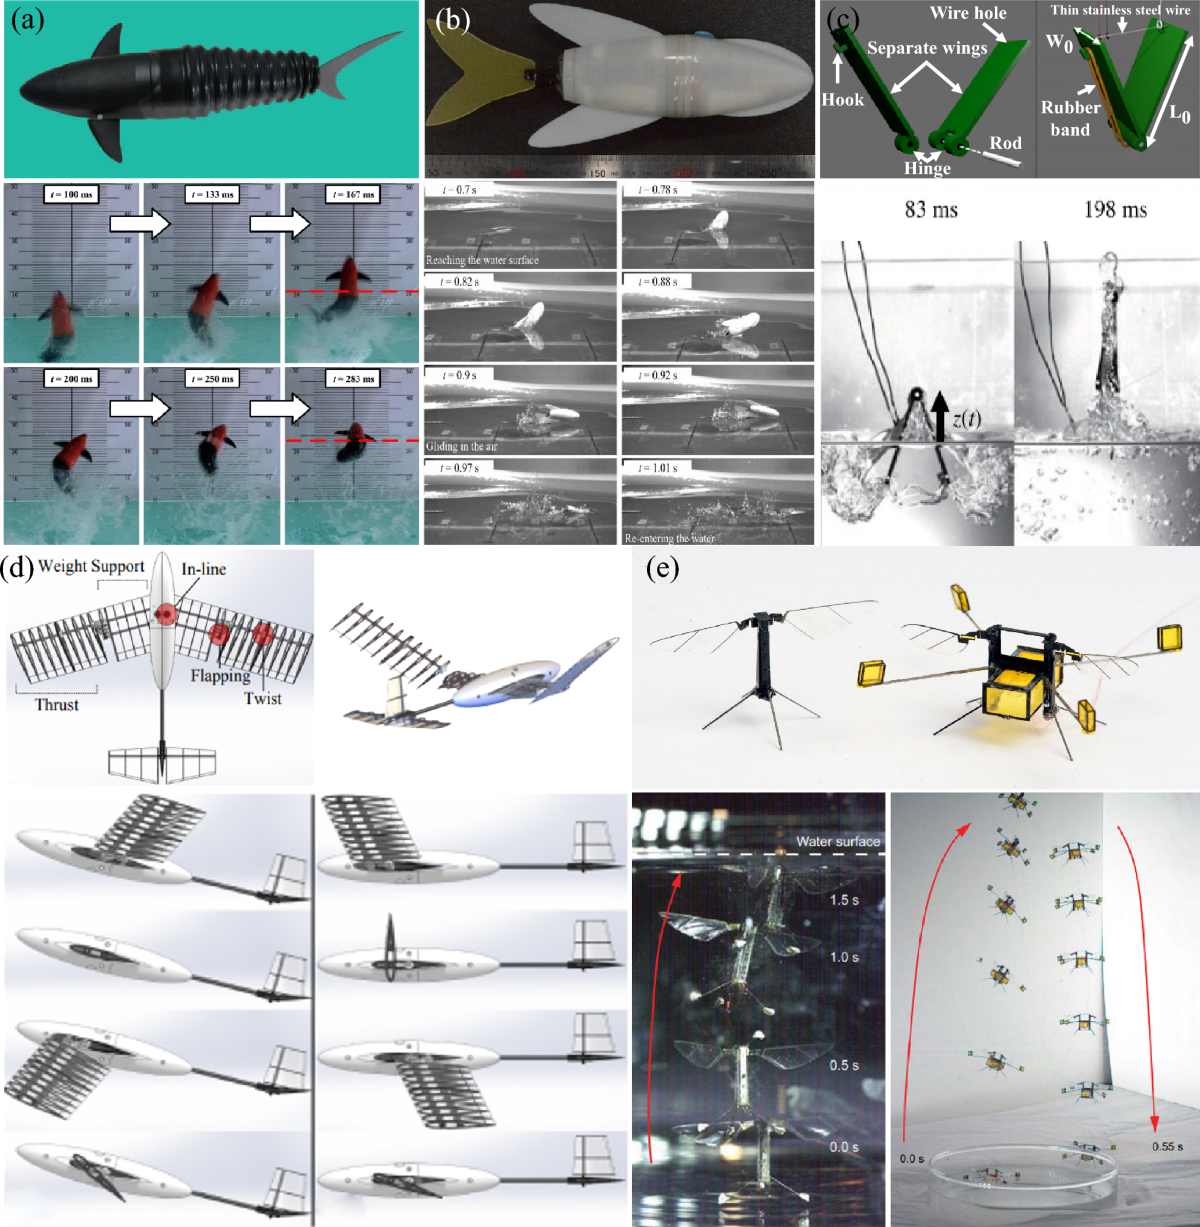 Design and Theoretical Research on Aerial-Aquatic Vehicles: A Review